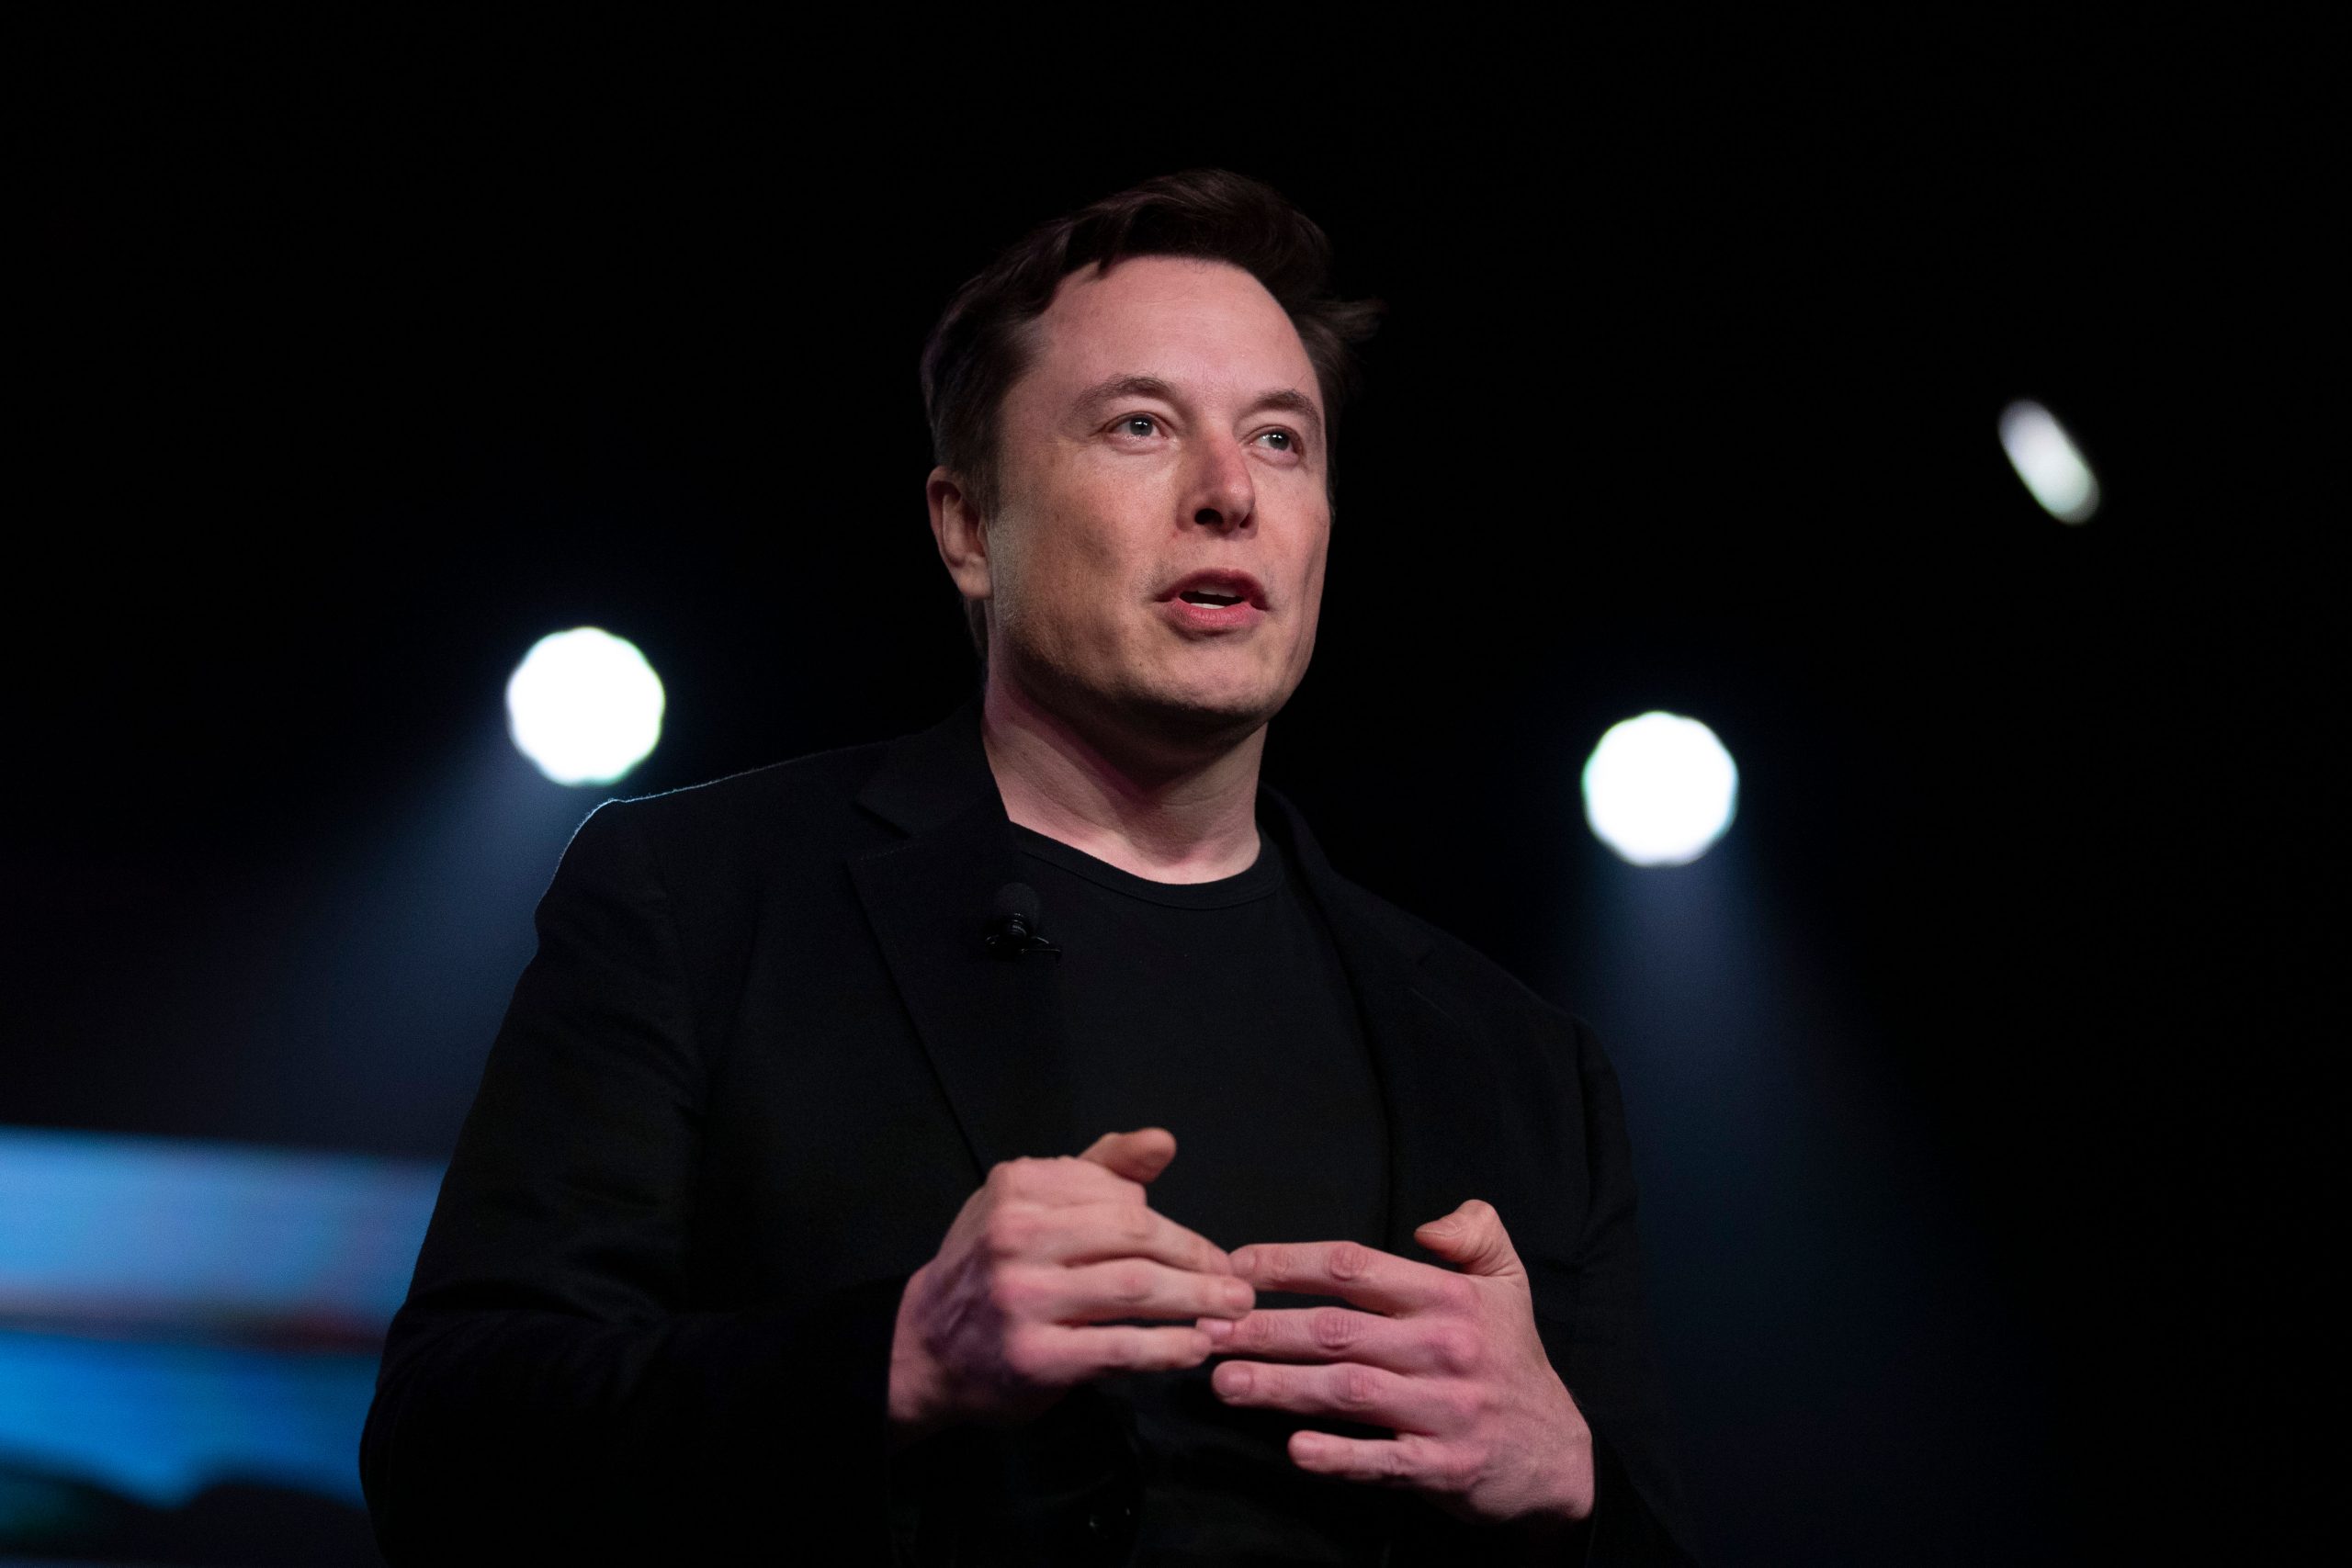 Funny games: How Musk’s Twitter acquisition stance could destabilize company